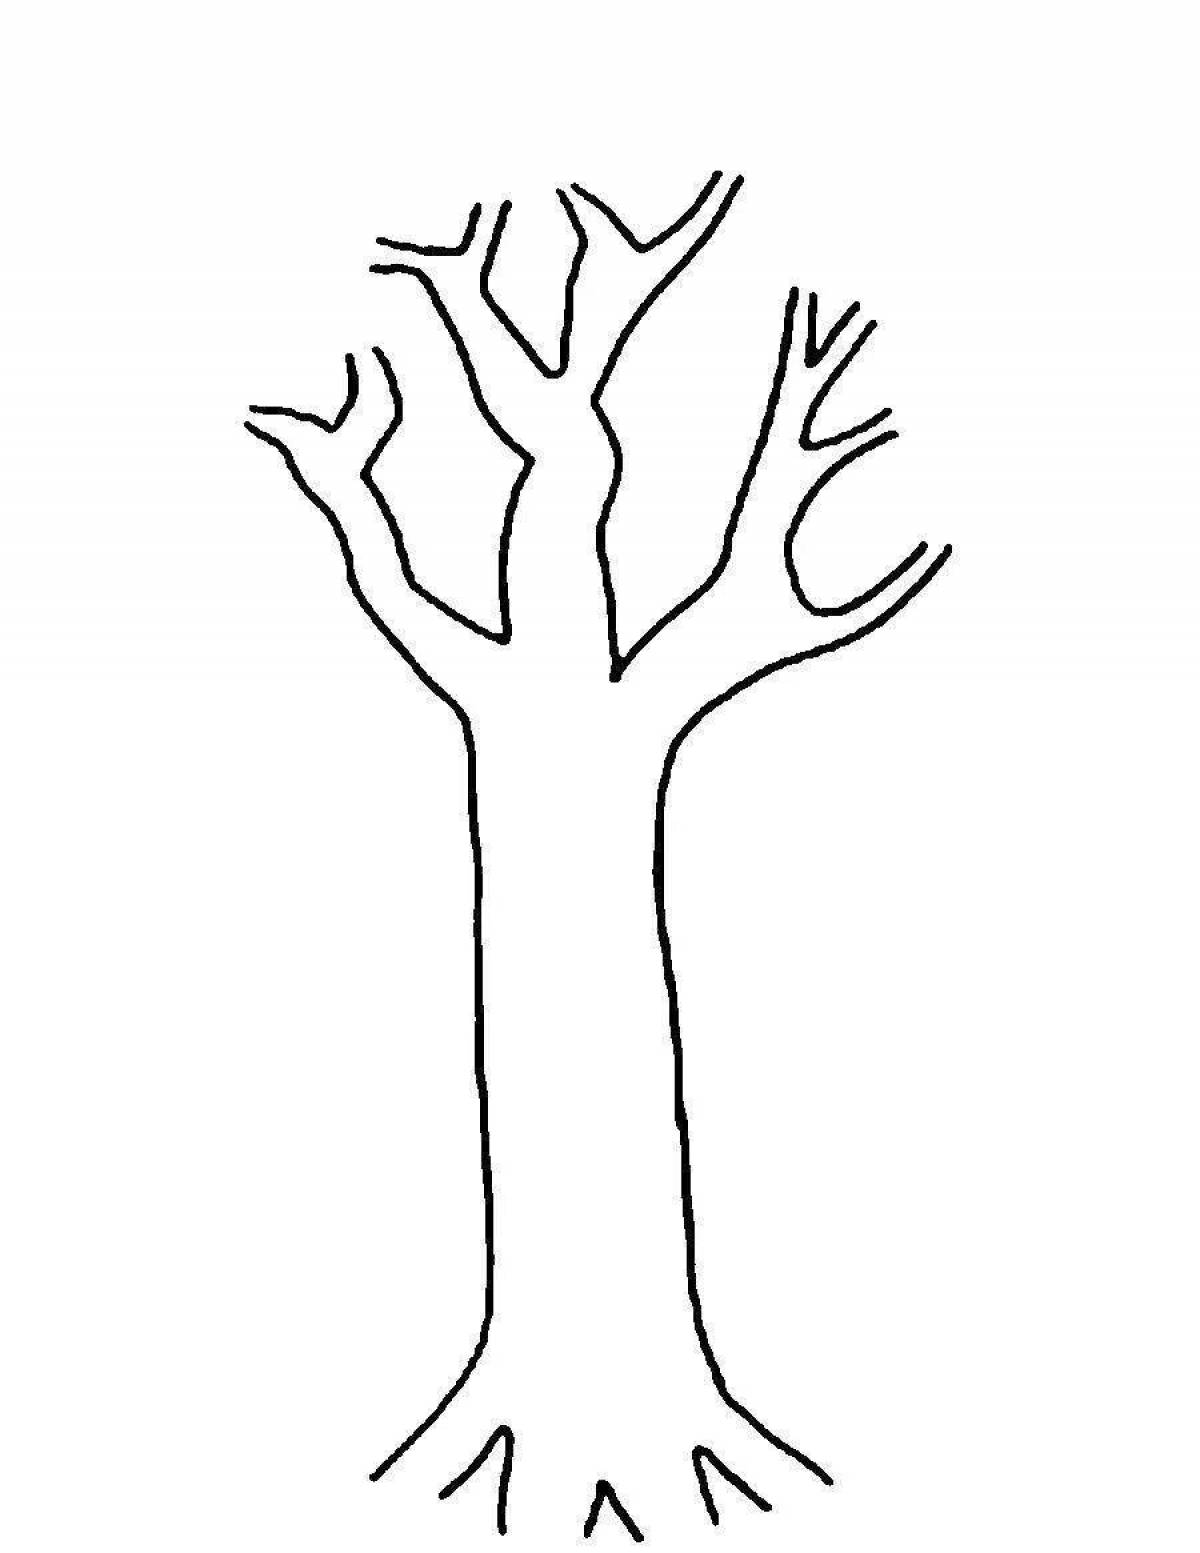 Coloring page majestic tree without leaves